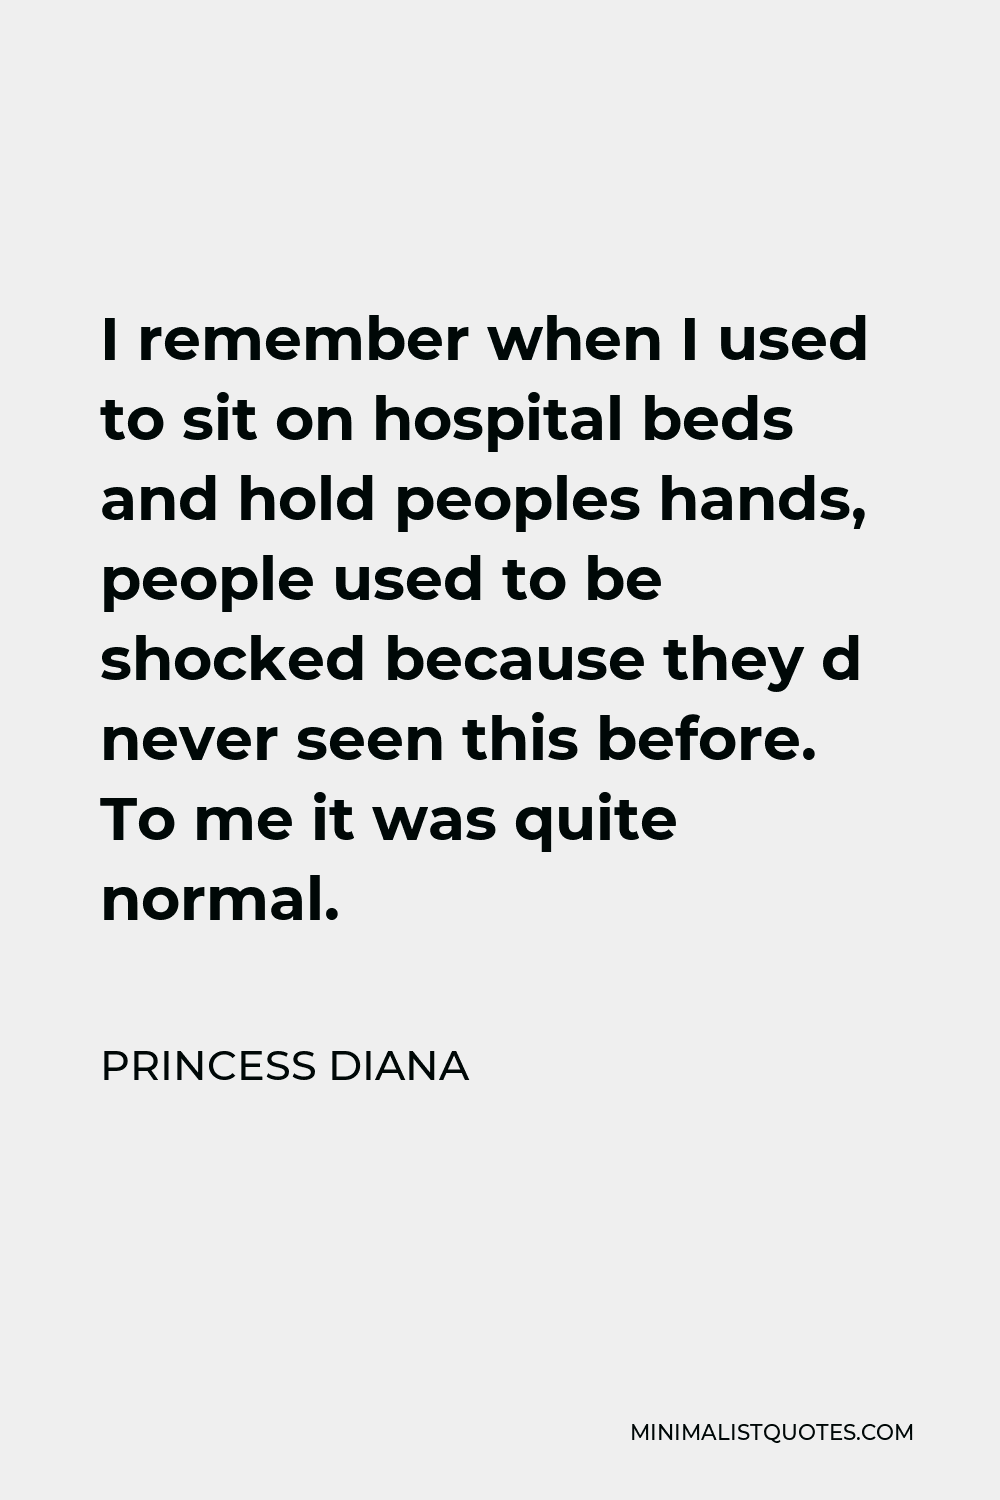 Princess Diana Quote - I remember when I used to sit on hospital beds and hold peoples hands, people used to be shocked because they d never seen this before. To me it was quite normal.